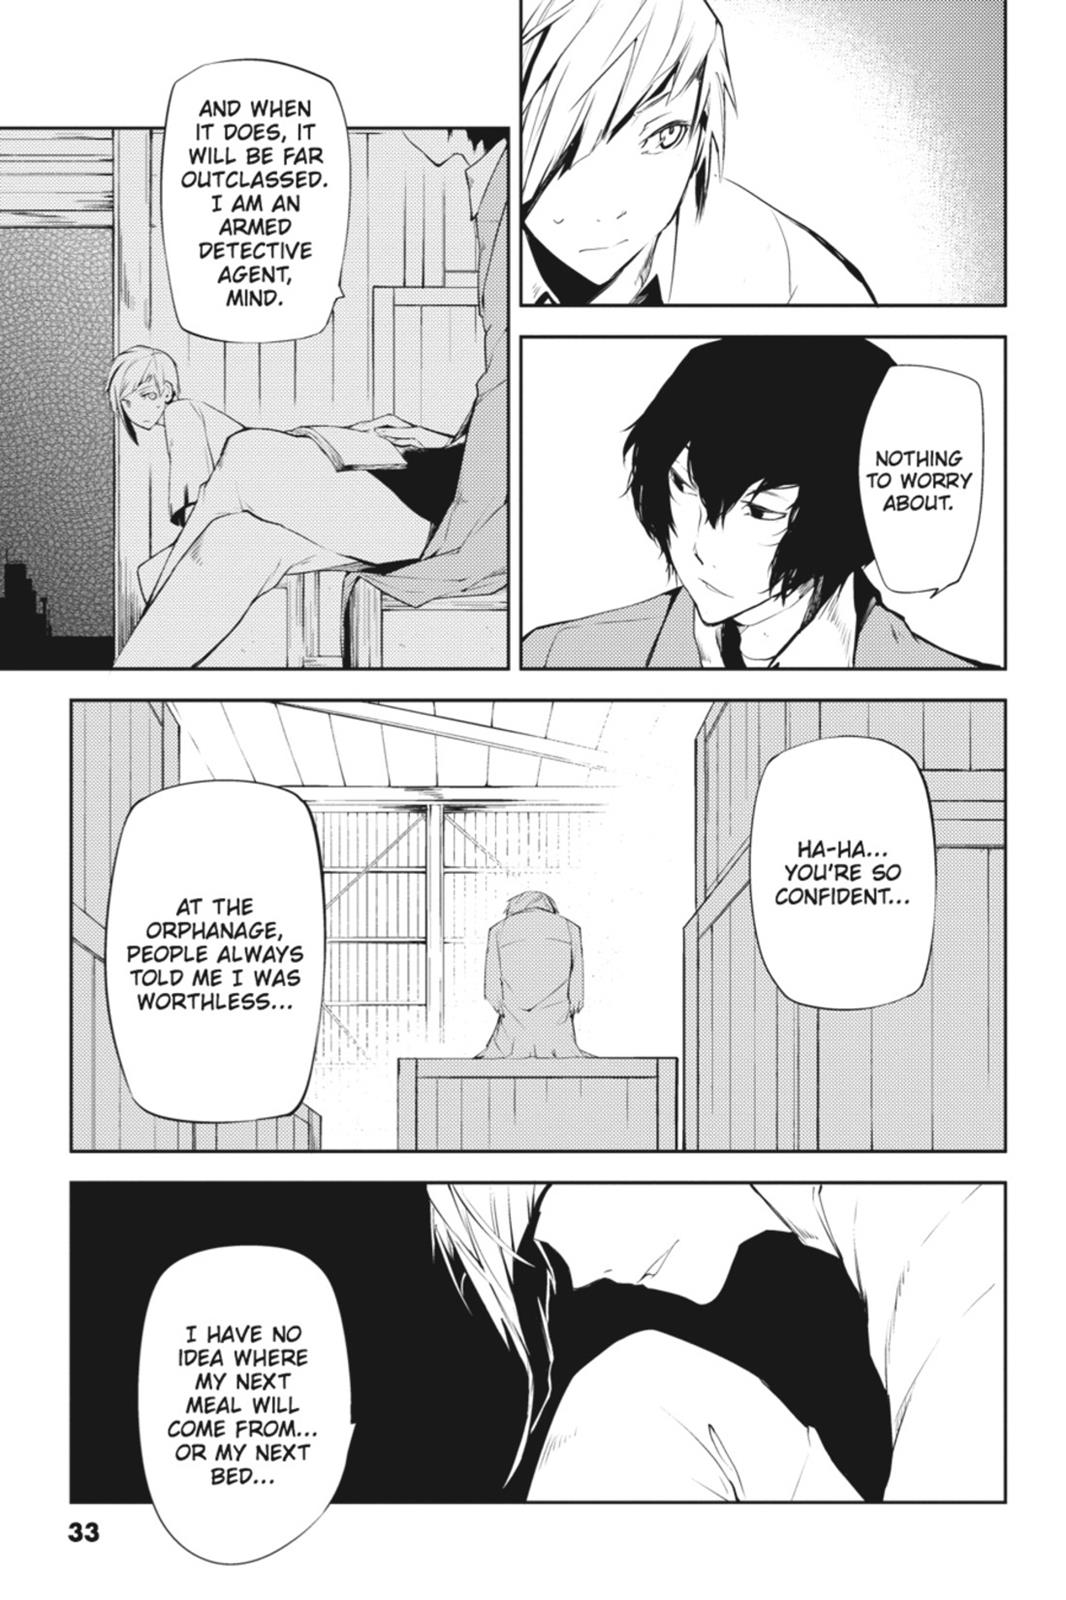 Bungou Stray Dogs, Chapter 1 image 33